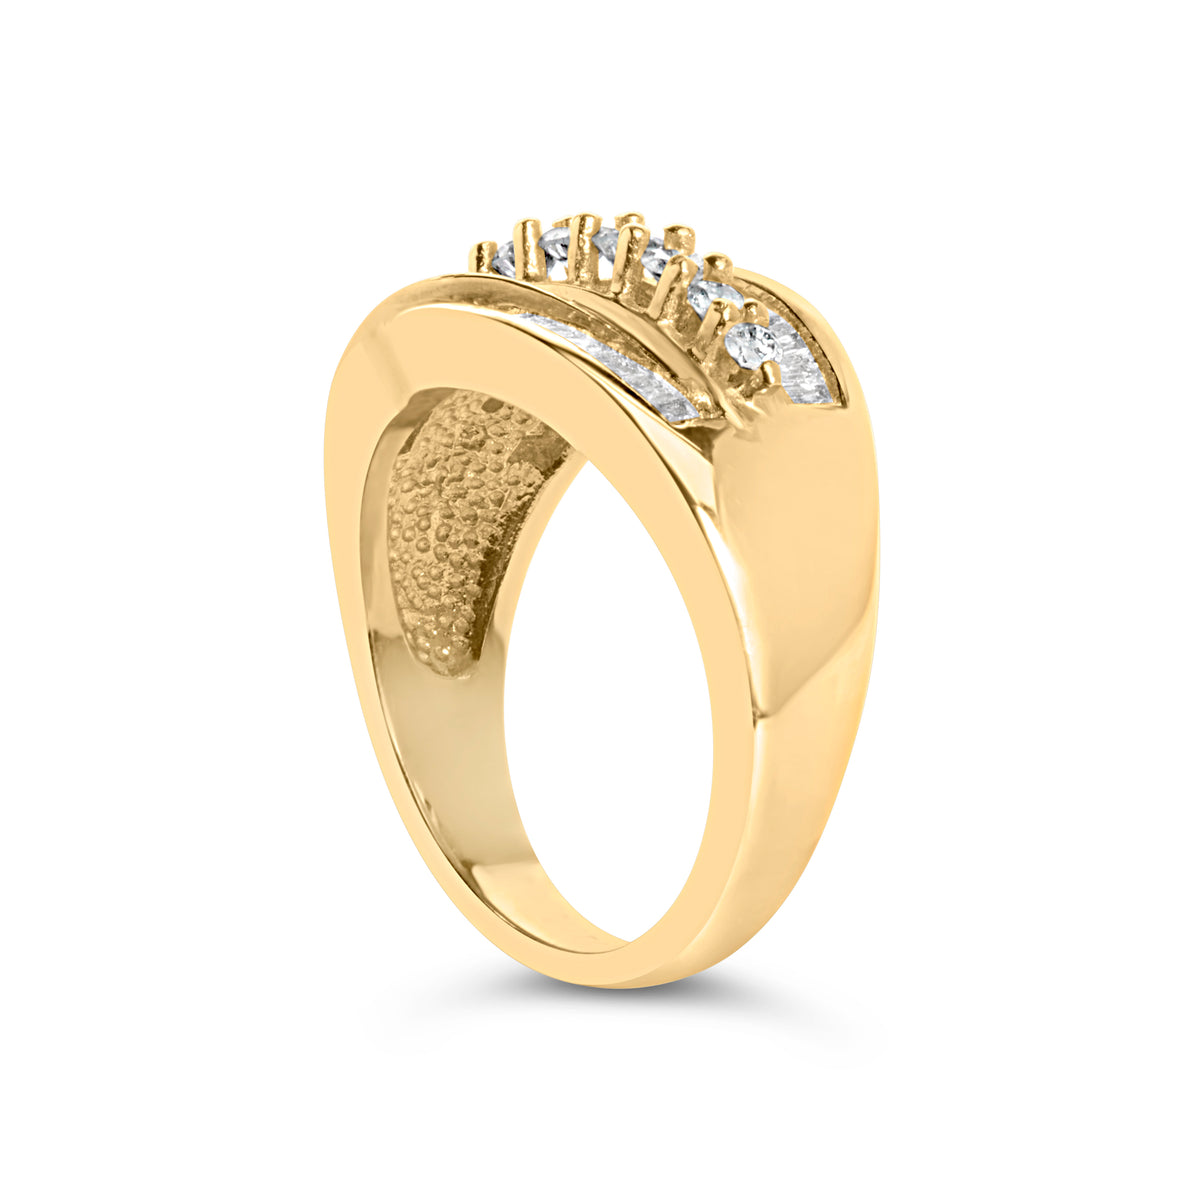 14K Yellow Gold 1.00 Cttw Diamond Cocktall Cluster 5 Stone Ring (H-I Color, SI1-I1 Clarity) - Ring Size 7